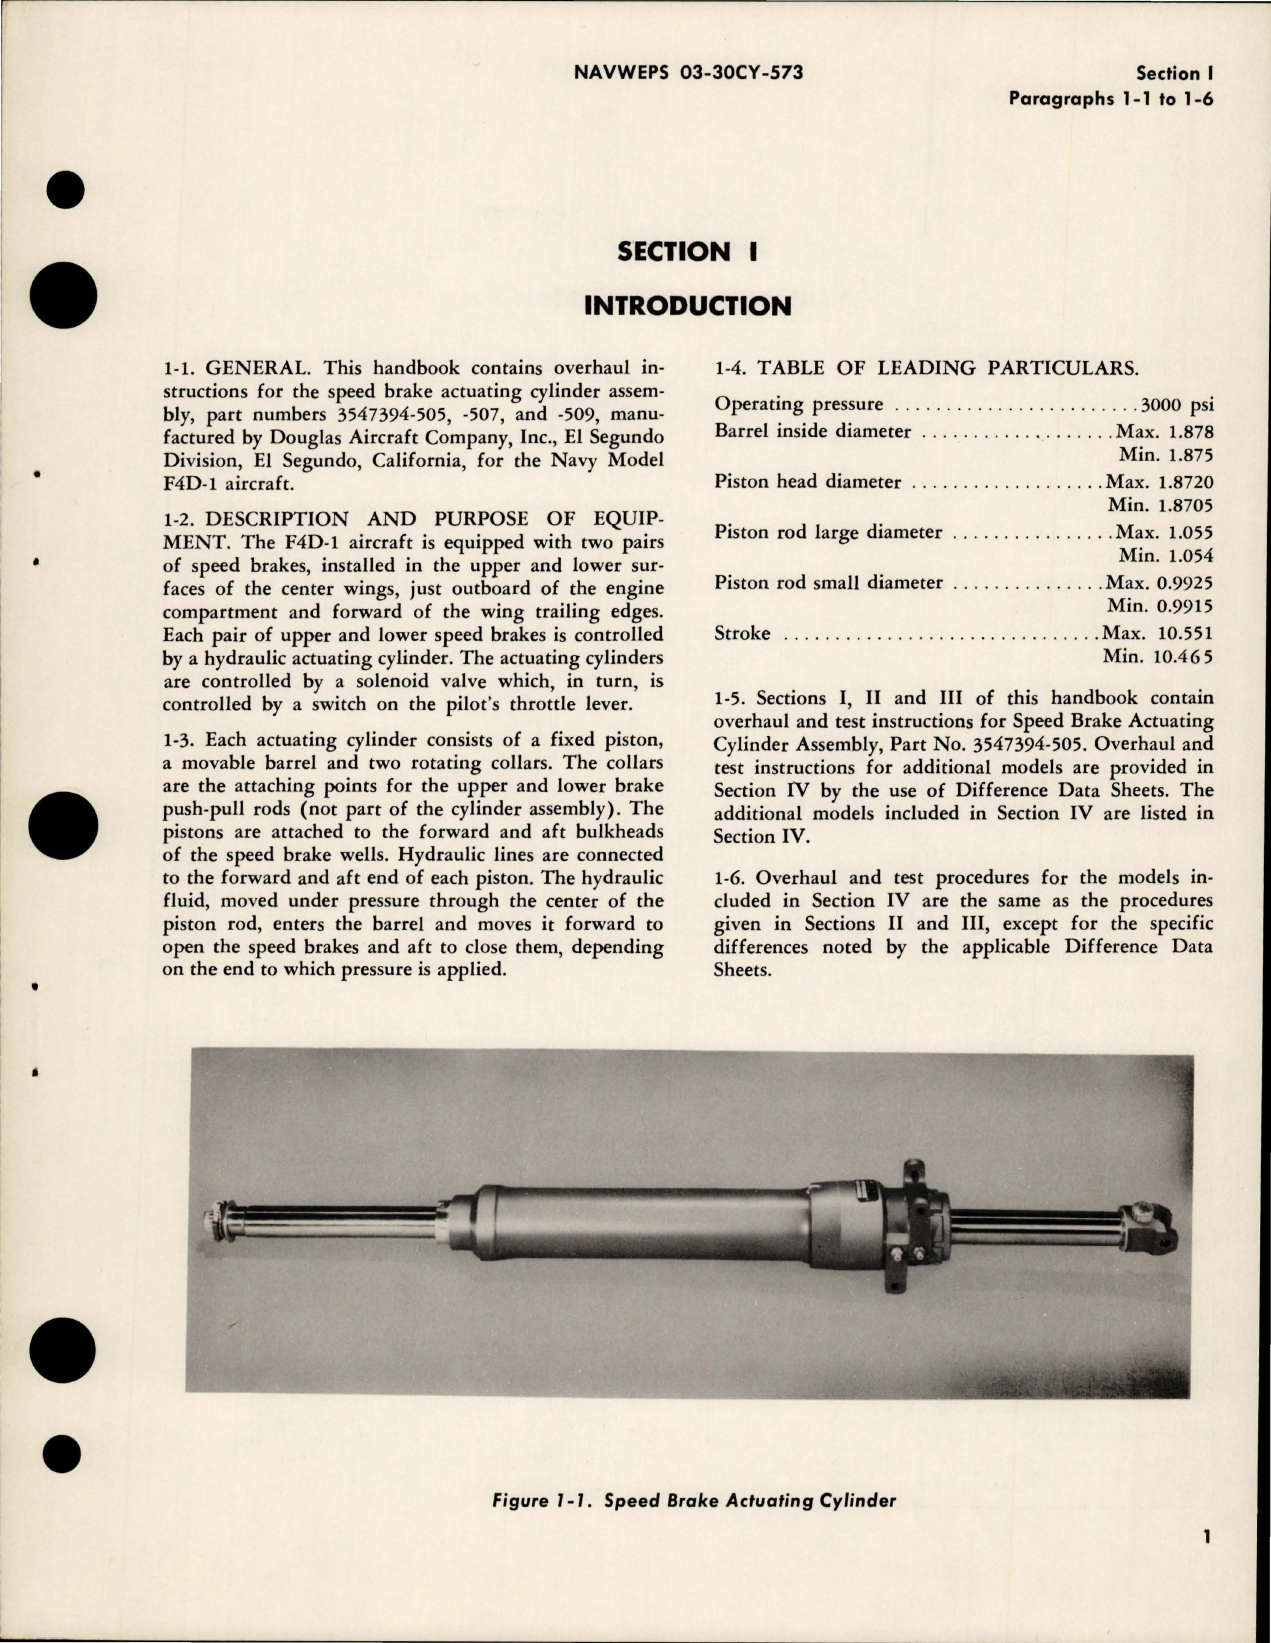 Sample page 5 from AirCorps Library document: Overhaul Instructions for Speed Brake Actuating Cylinder - Parts 3547394-505, 3547394-507, 3547394-509 